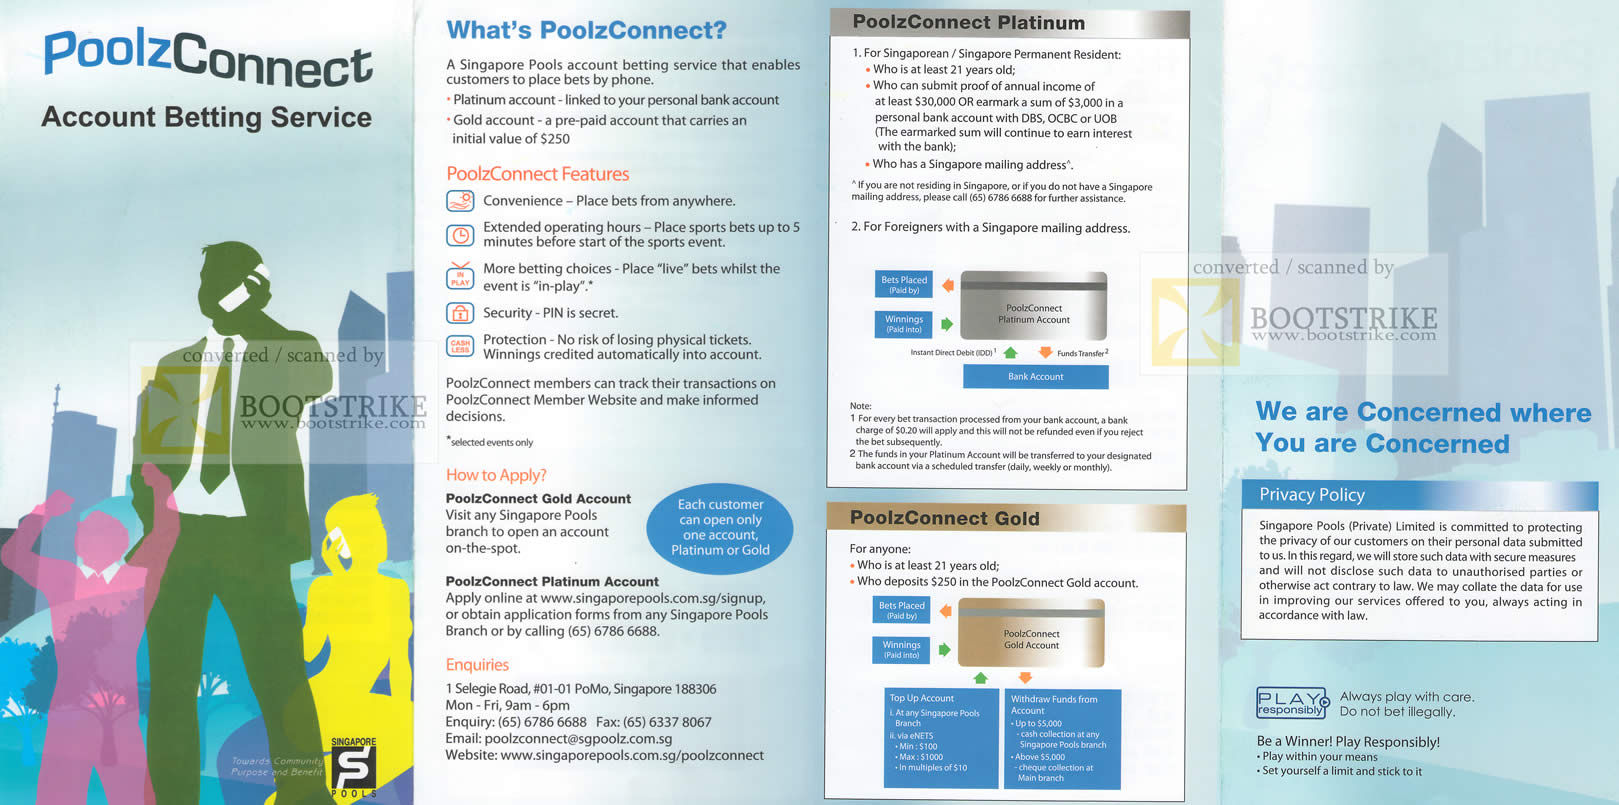 Sitex 2009 price list image brochure of Singapore Pools PoolzConnect Account Betting Service